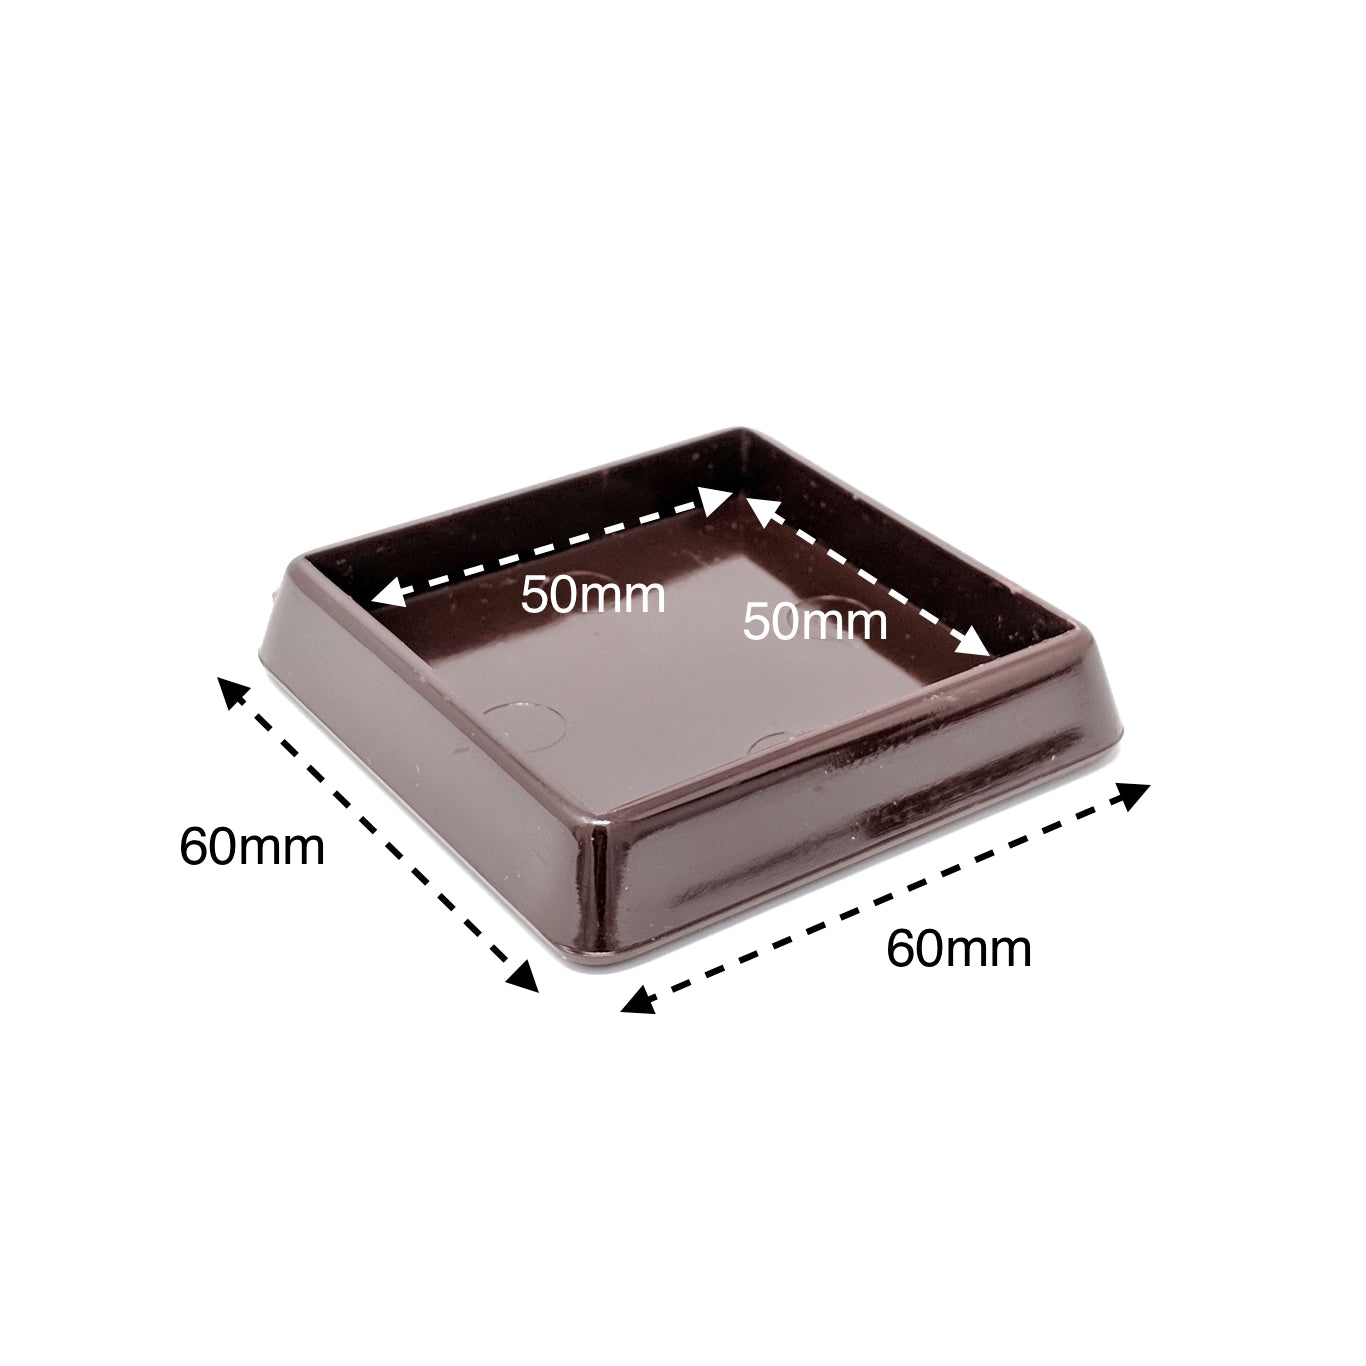 50x50mm Brown Square Furniture Leg Cups Floor Carpet Protector - Made in Germany - Keay Vital Parts